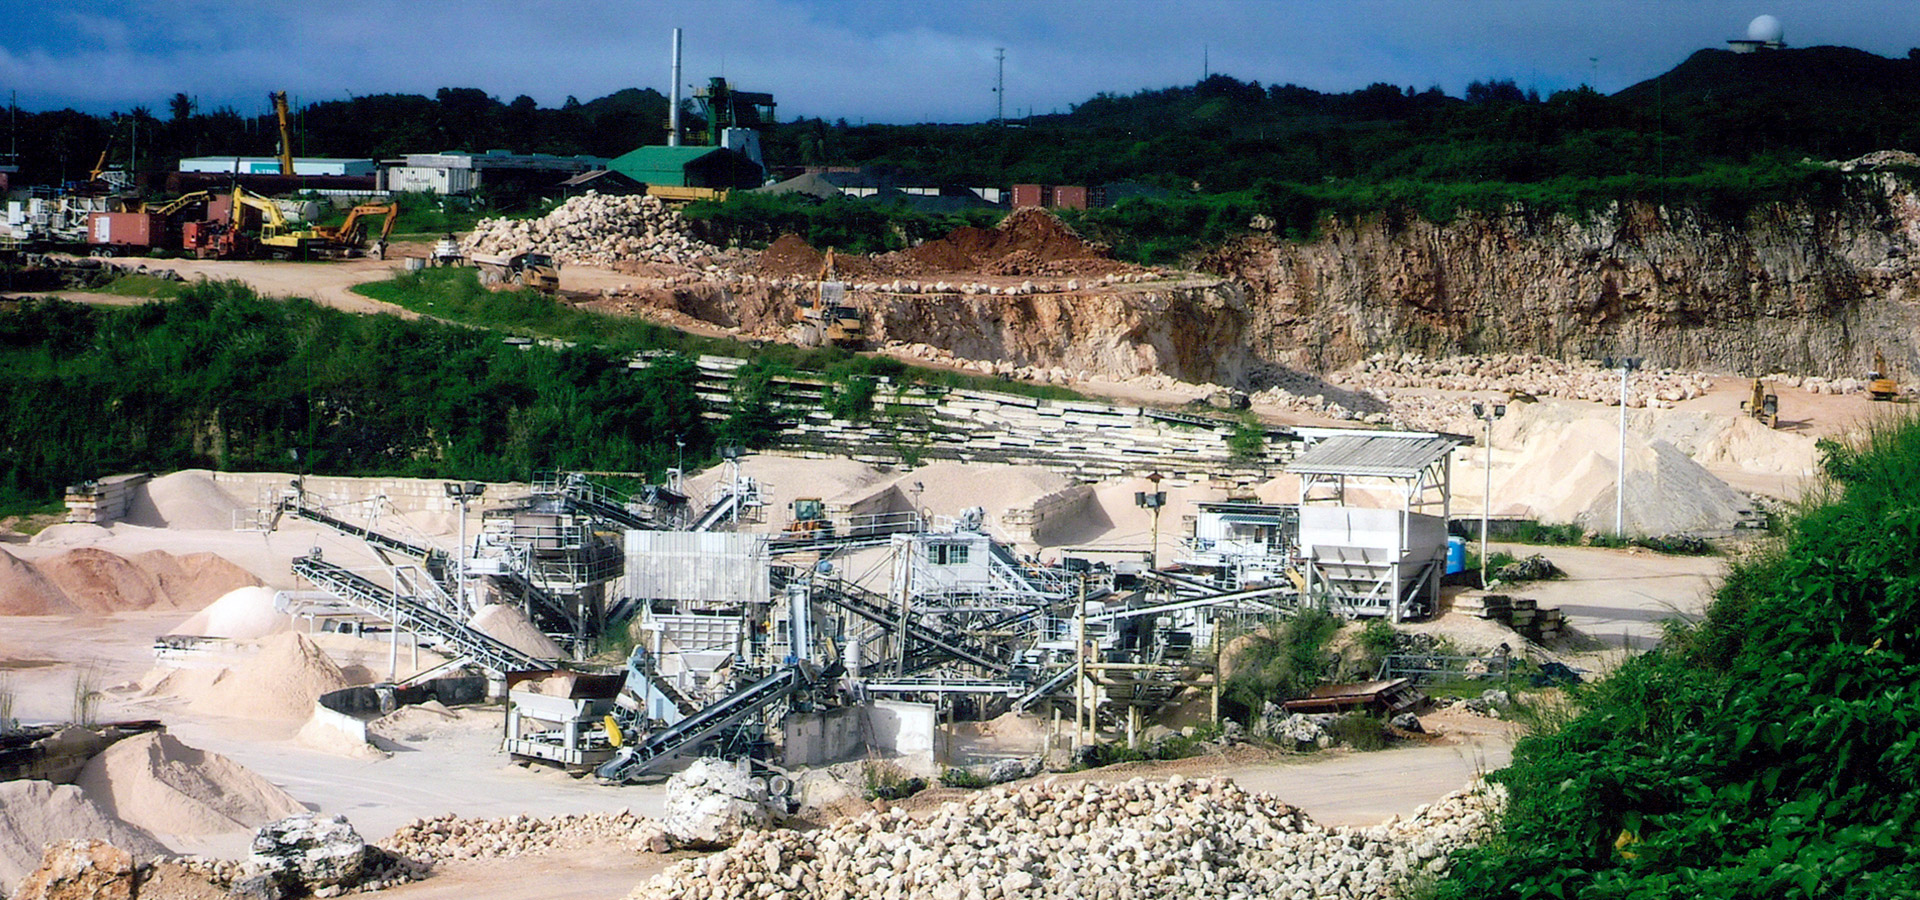 A snapshot in time: The Quarry yard